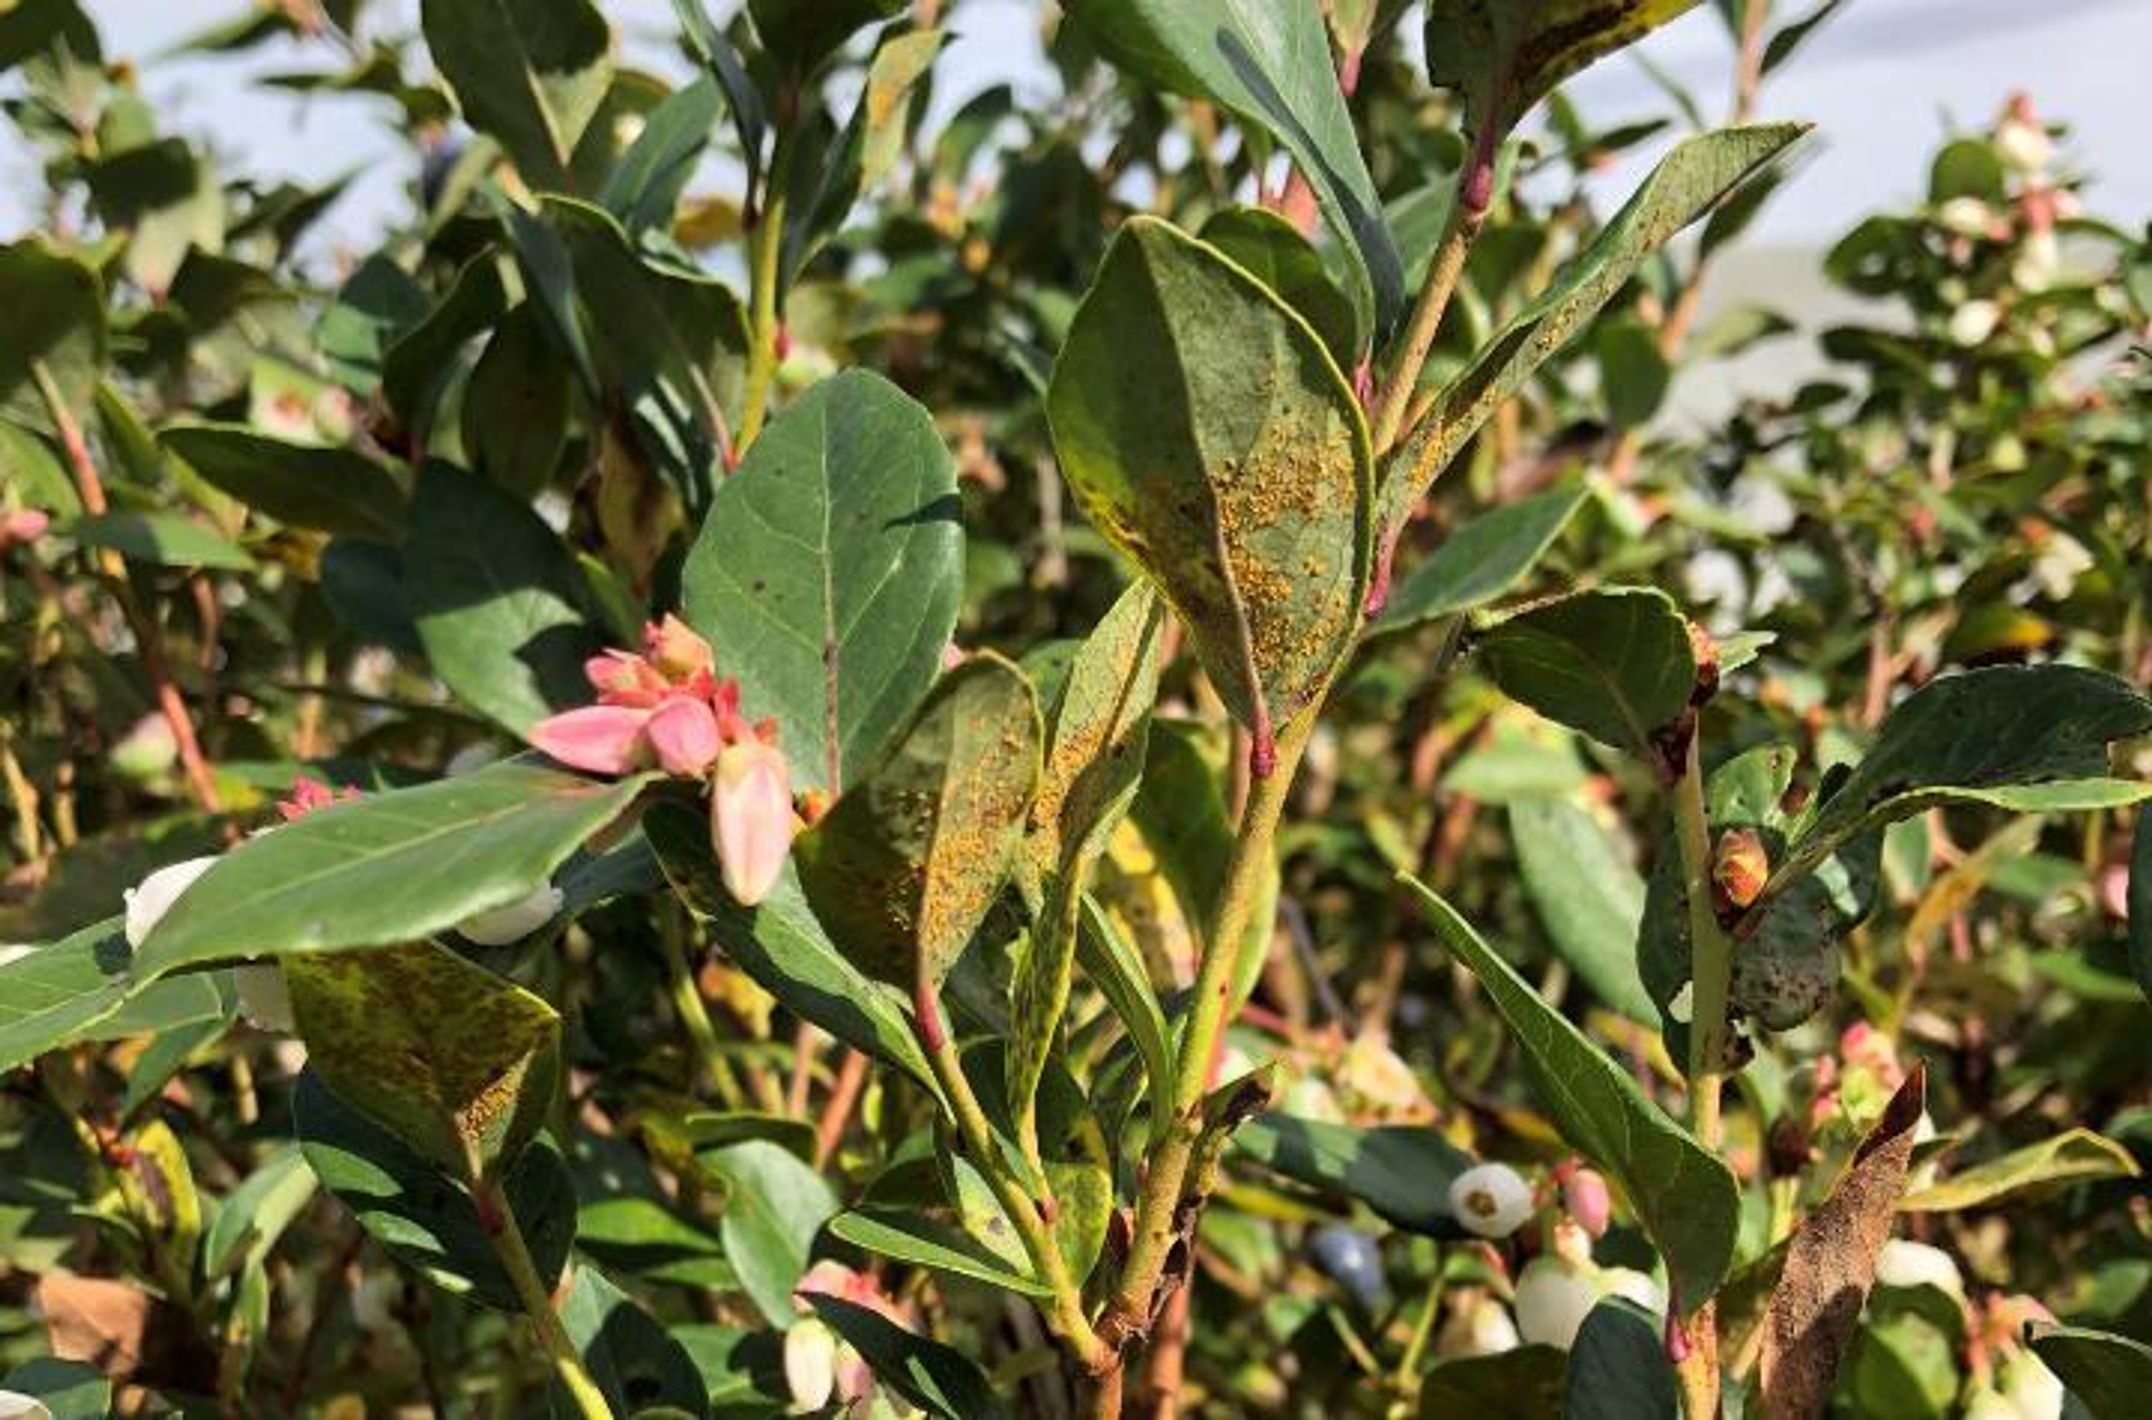 Rust infected blueberry leaves showing yellow rust pustules on undersides of leaves